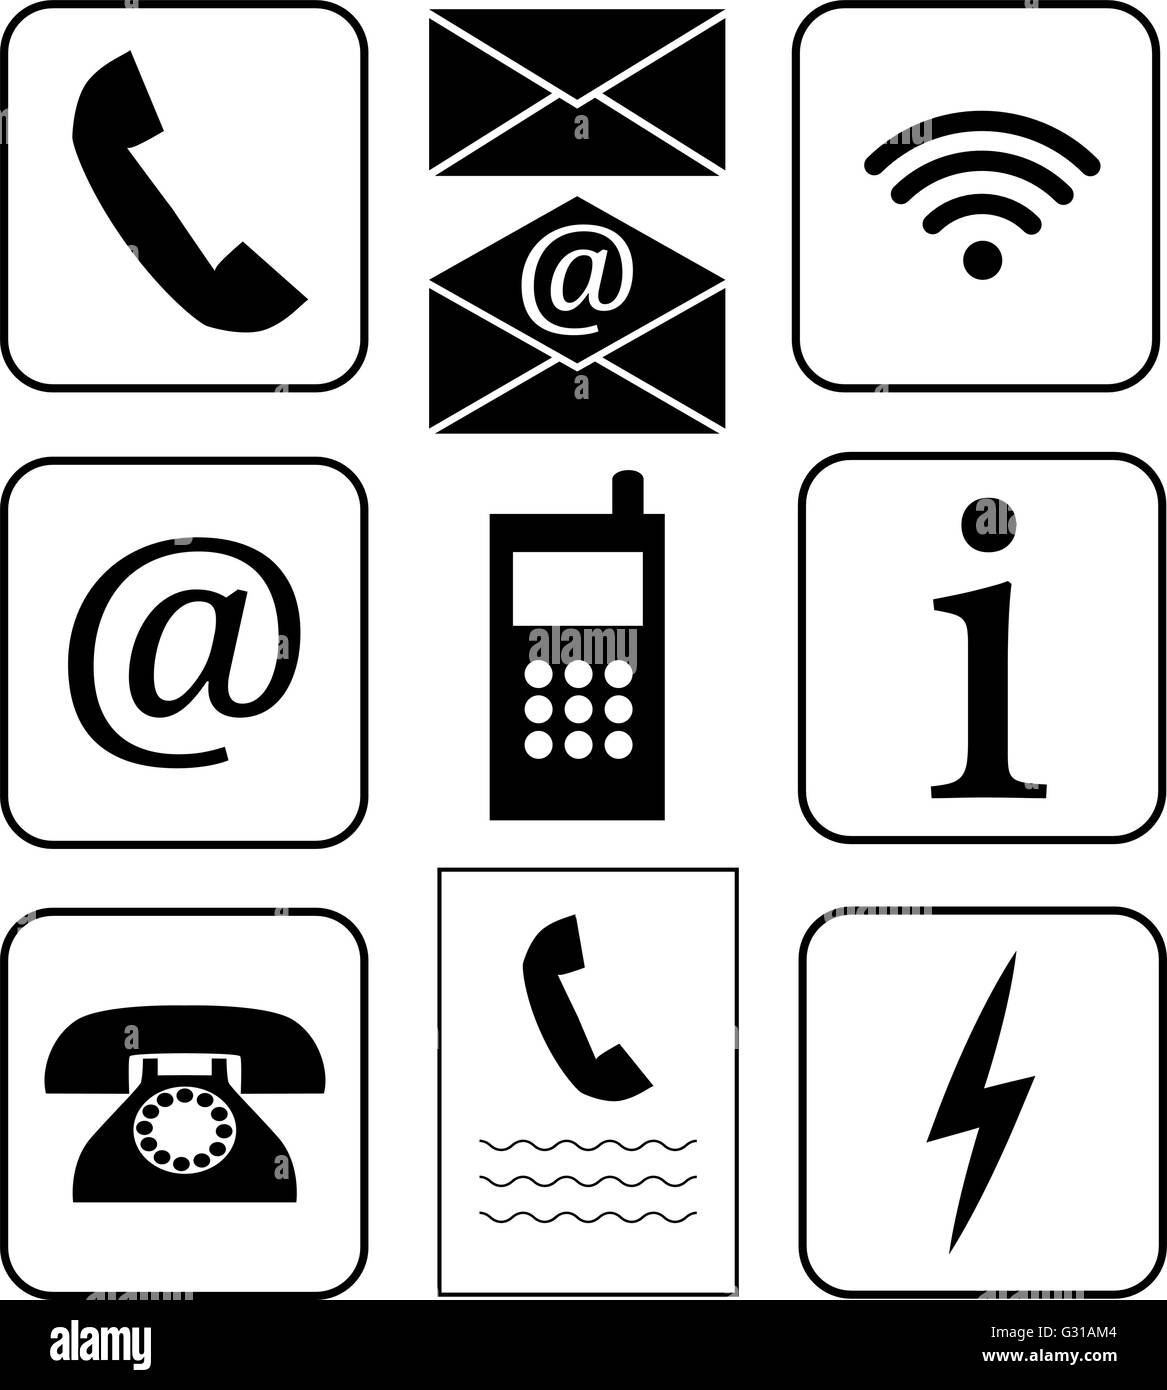 Vector. Set of icons. Public signs. Communication and info. Telecommunication icons. Phone, wifi, info, mail, e-mail, fax,charge Stock Vector